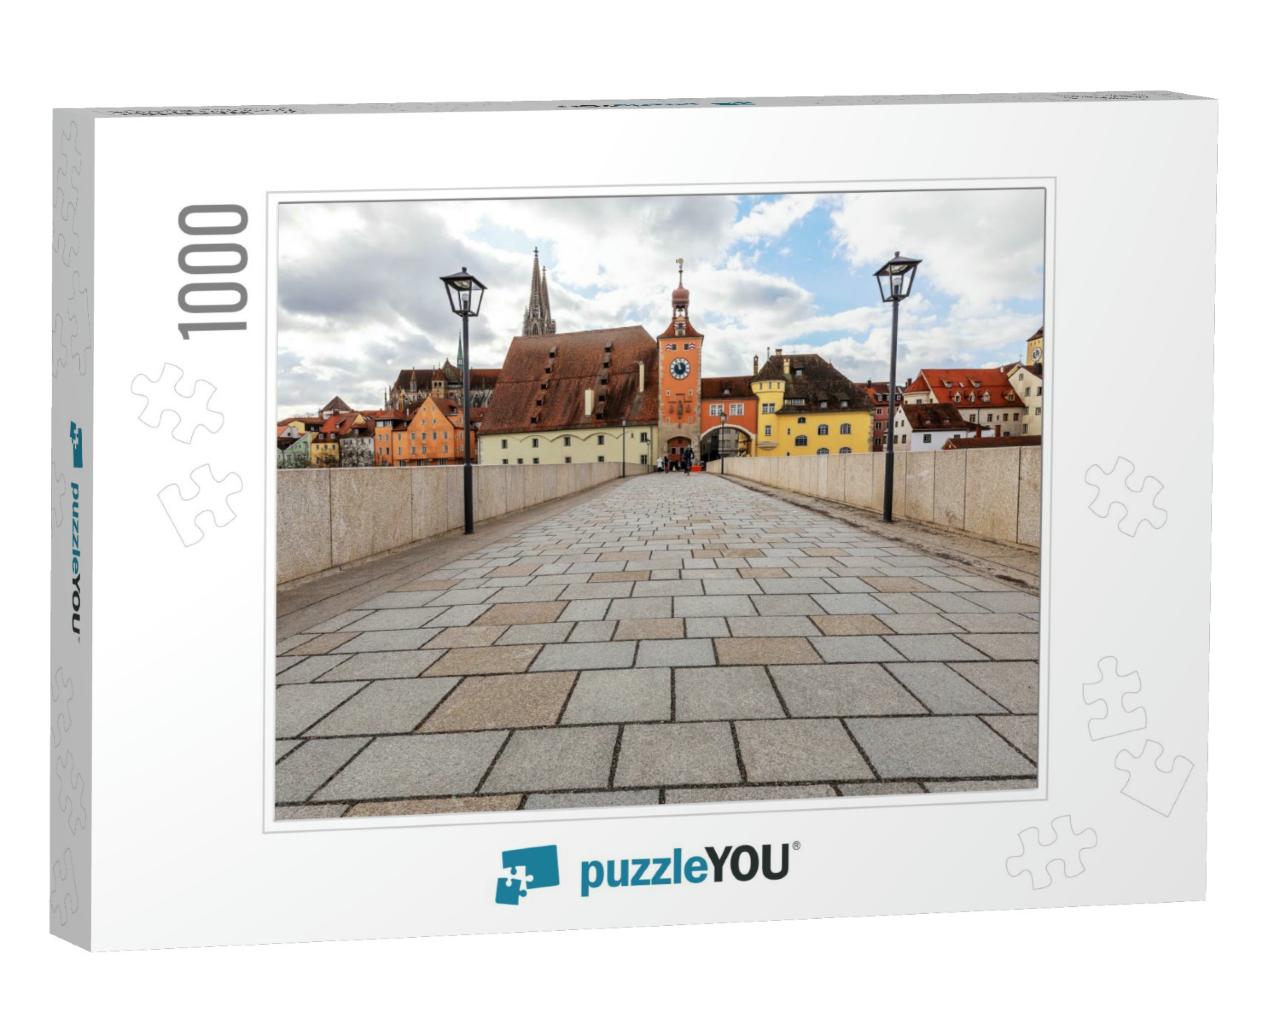 Ancient Stone Foot Bridge. Regensburg. Germany... Jigsaw Puzzle with 1000 pieces